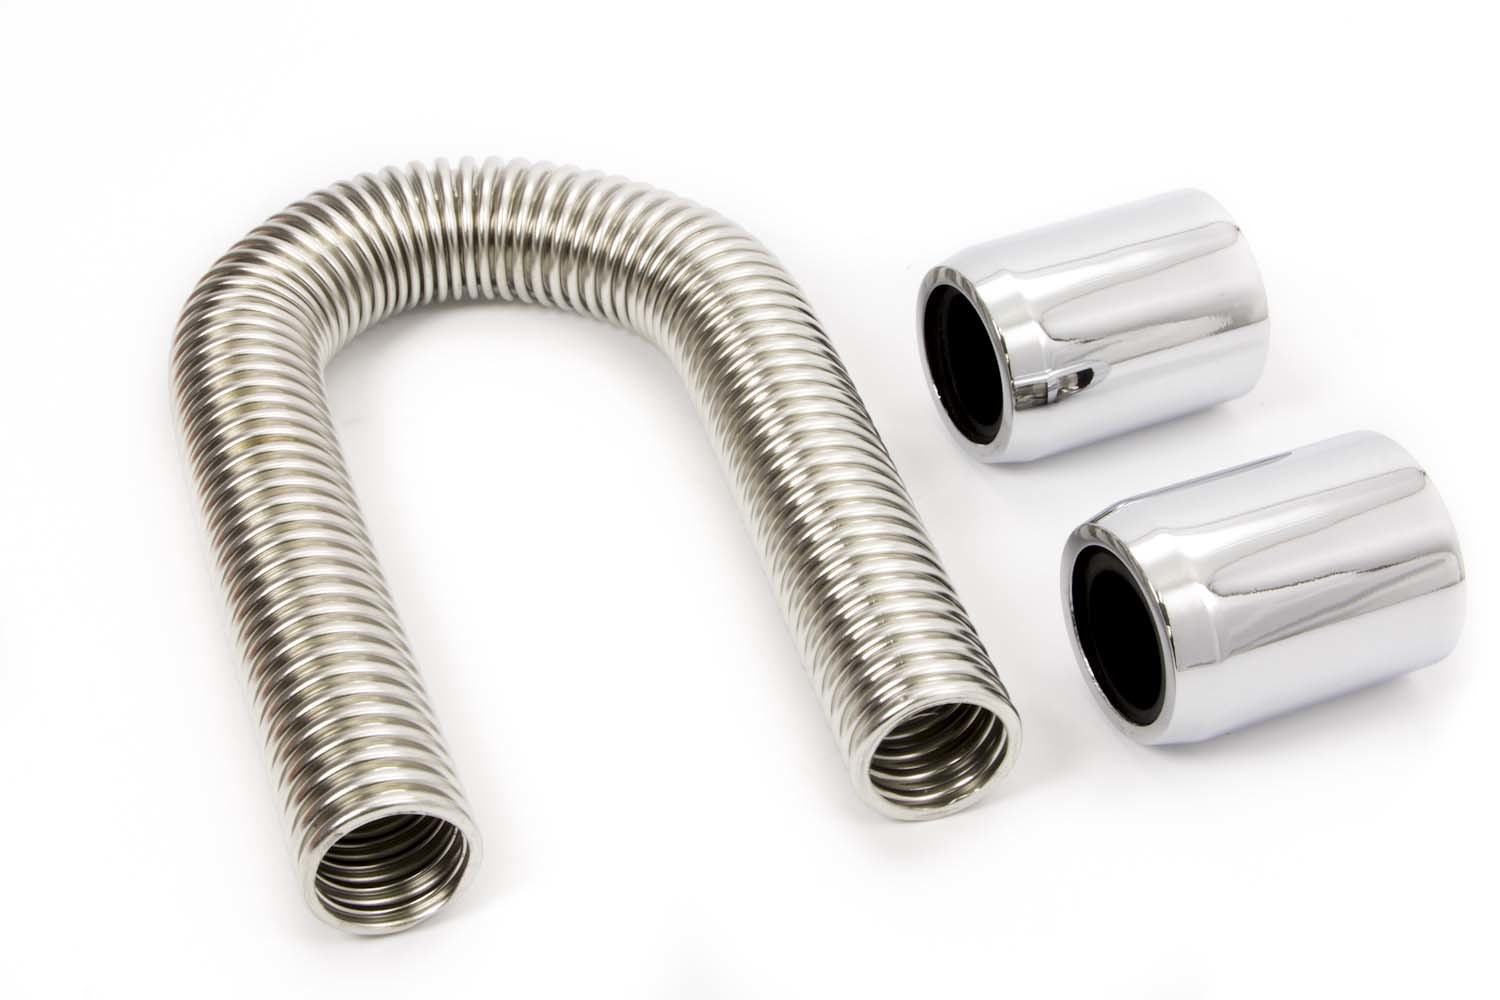 Racing Power Company R7308 Radiator Hose Kit, 36 in Long, Chrome End Caps, Stainless, Polished, Kit